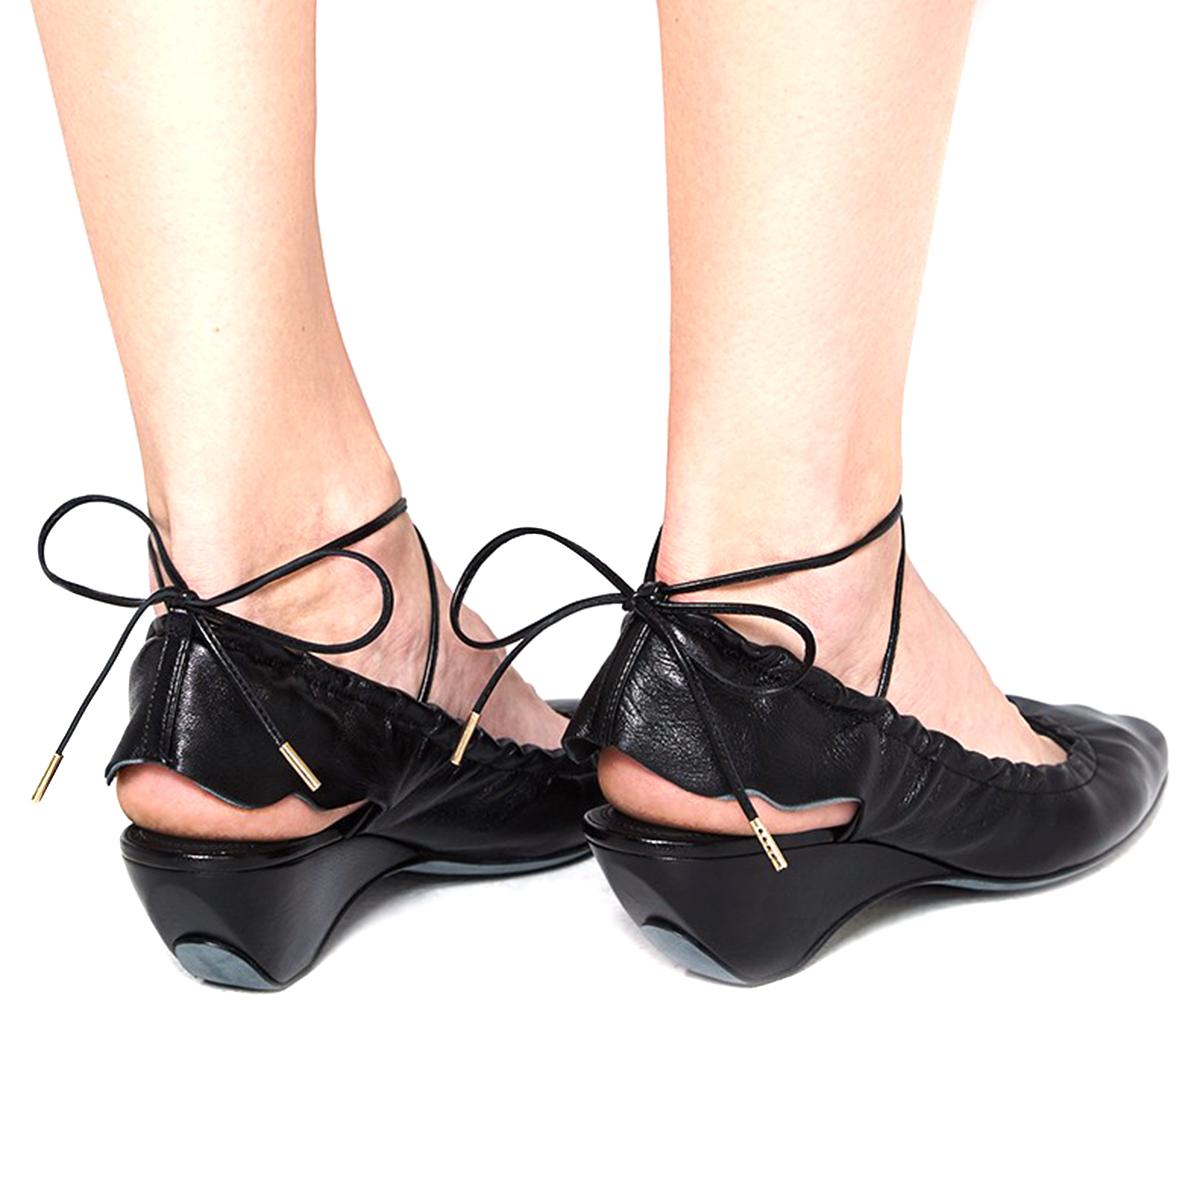  J.W. Anderson Black Leather Tie Back Ballerinas 

- Black Leather Ballerinas 
- Tie back lace-up fastening
- Stretch around heel 
- Round toe
- Open back 
- Curved heel 

This item comes with an additional dust bag. 

Please note, these items are